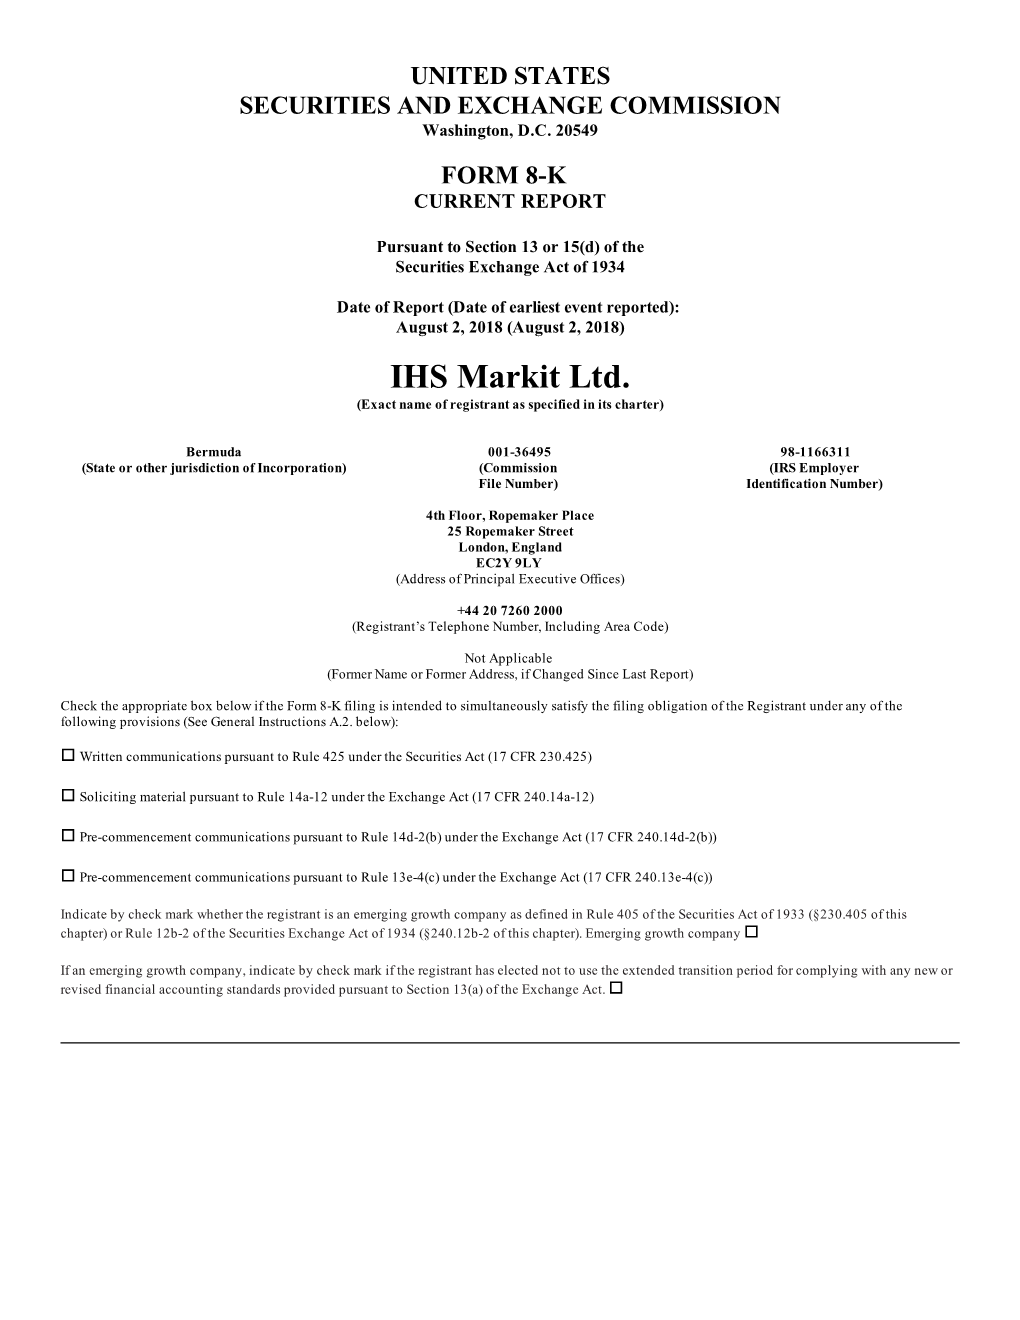 IHS Markit Ltd. (Exact Name of Registrant As Specified in Its Charter)